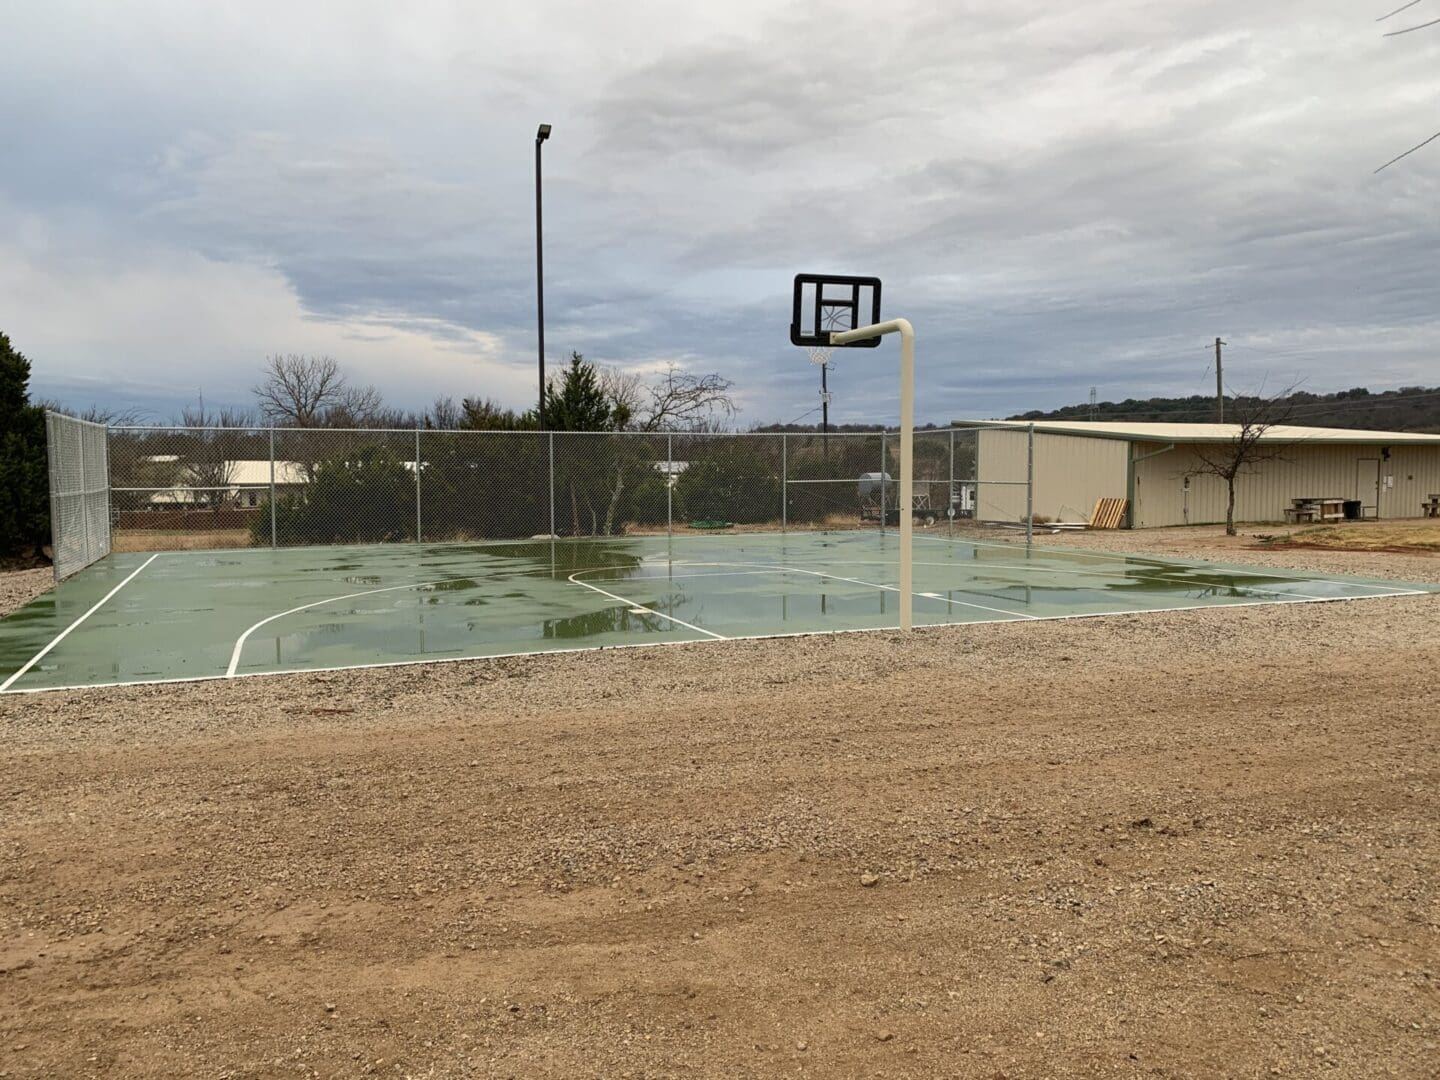 A basketball hoop in the middle of an empty field.